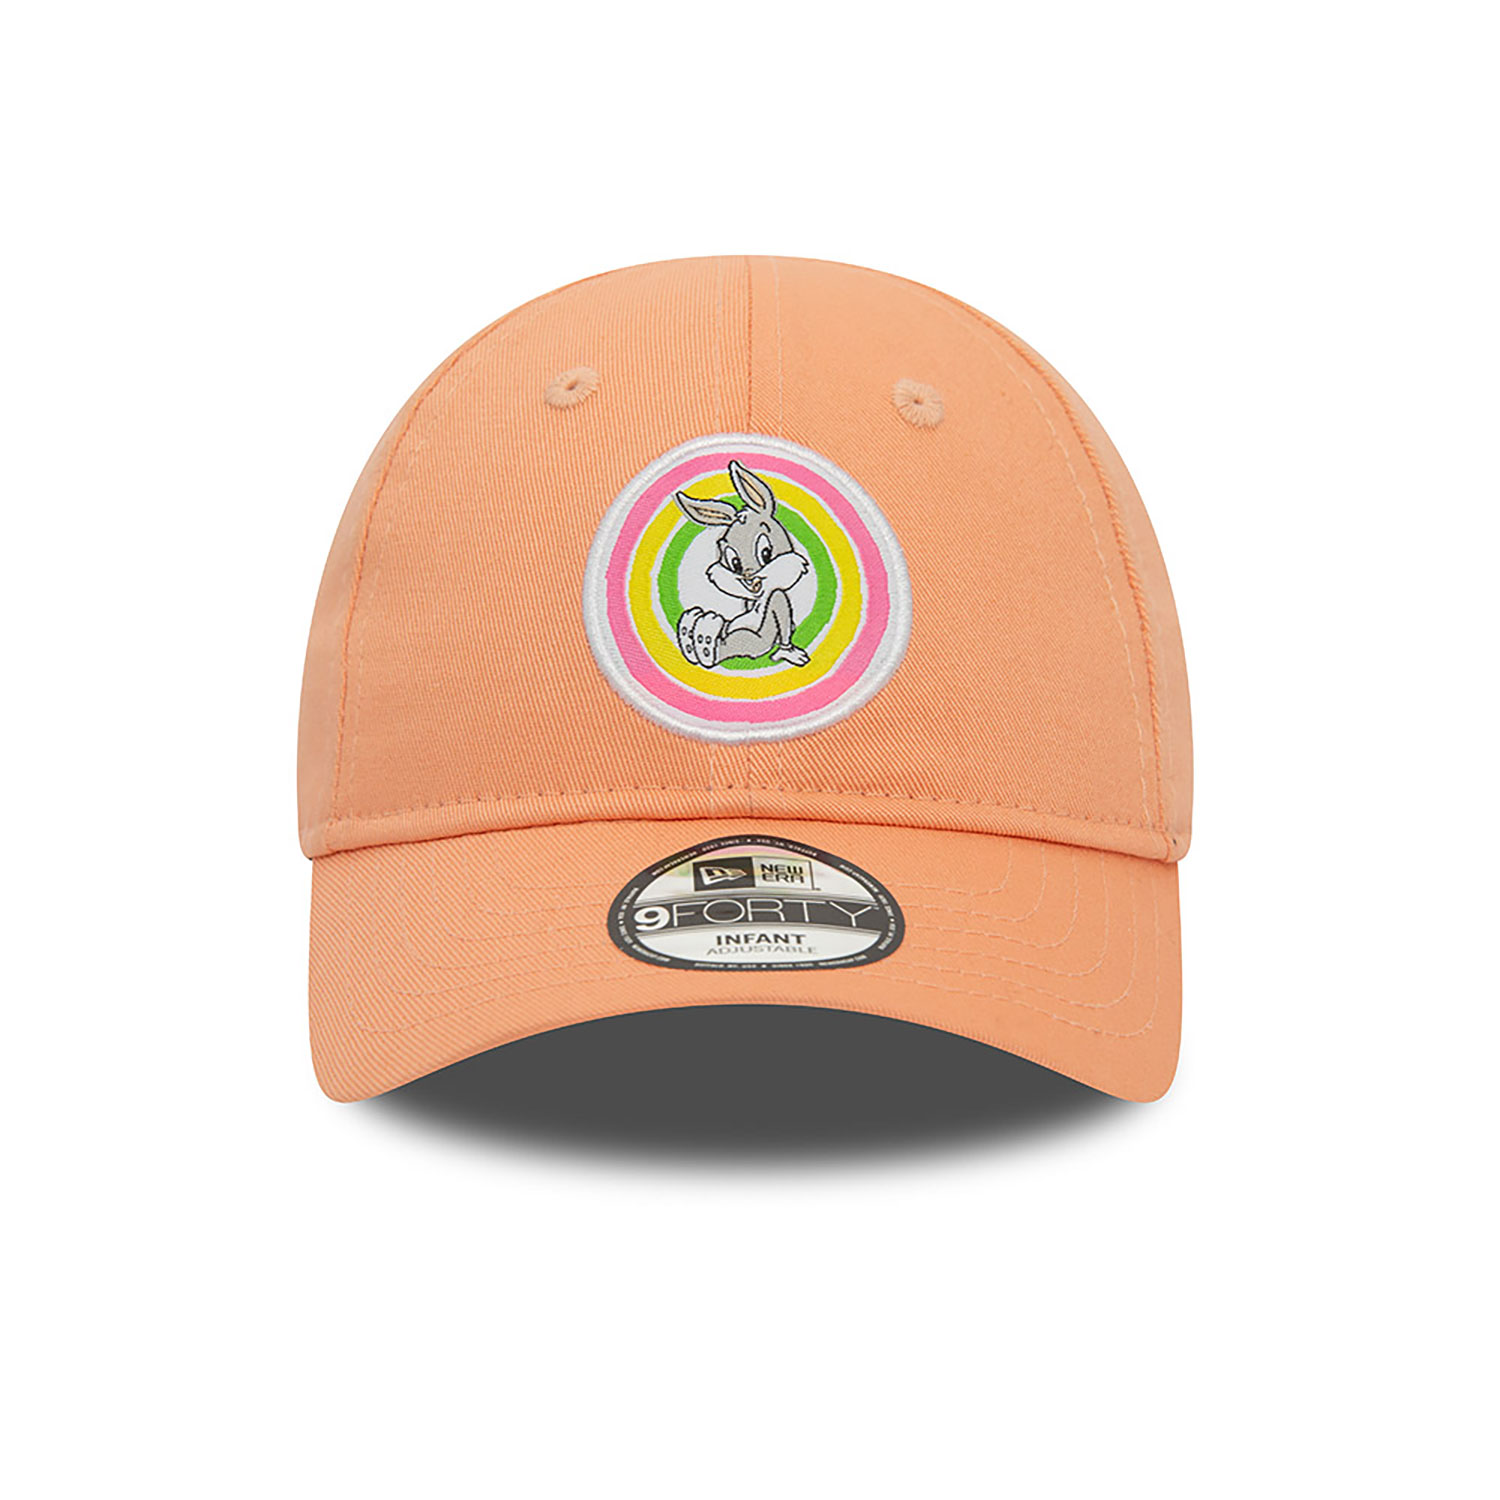 Bugs Bunny Infant Looney Tunes Pastel Peach 9FORTY Adjustable Cap